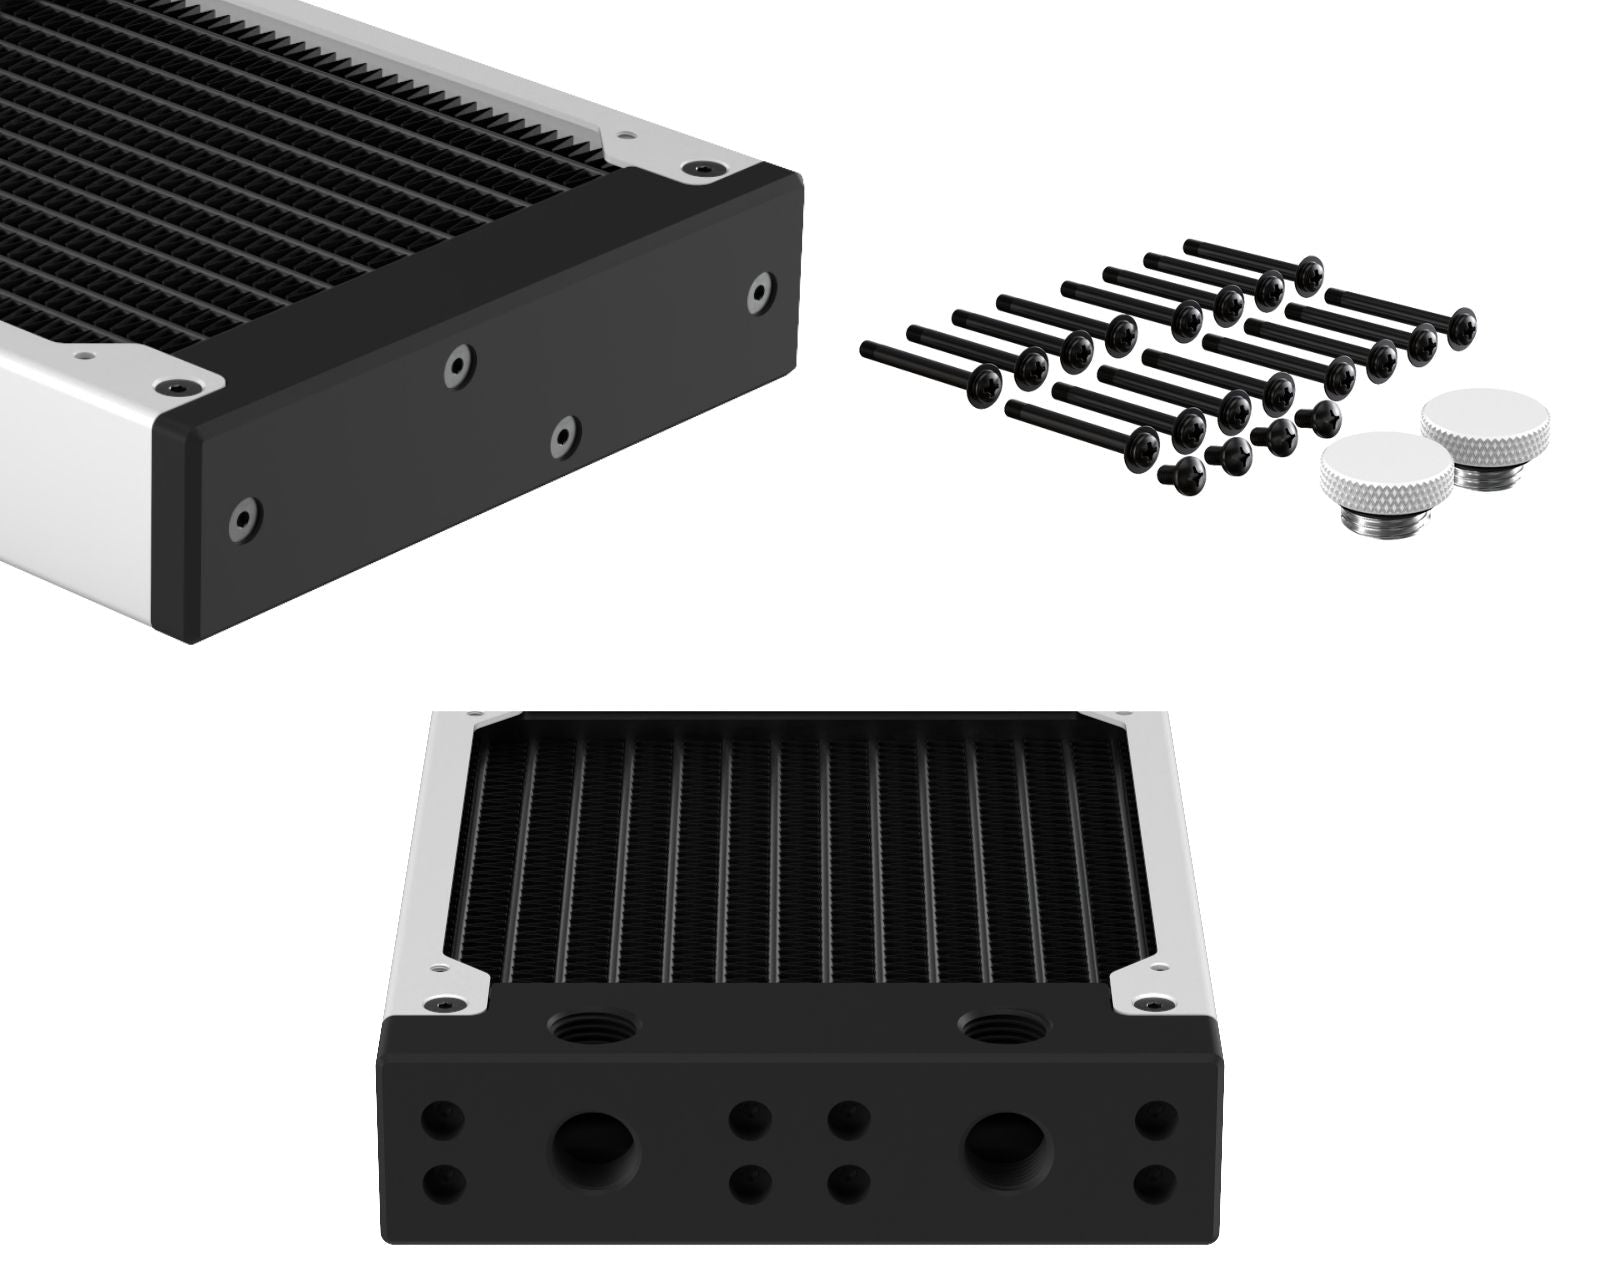 PrimoChill 480SL (30mm) EXIMO Modular Radiator, Black POM, 4x120mm, Quad Fan (R-SL-BK48) Available in 20+ Colors, Assembled in USA and Custom Watercooling Loop Ready - Sky White